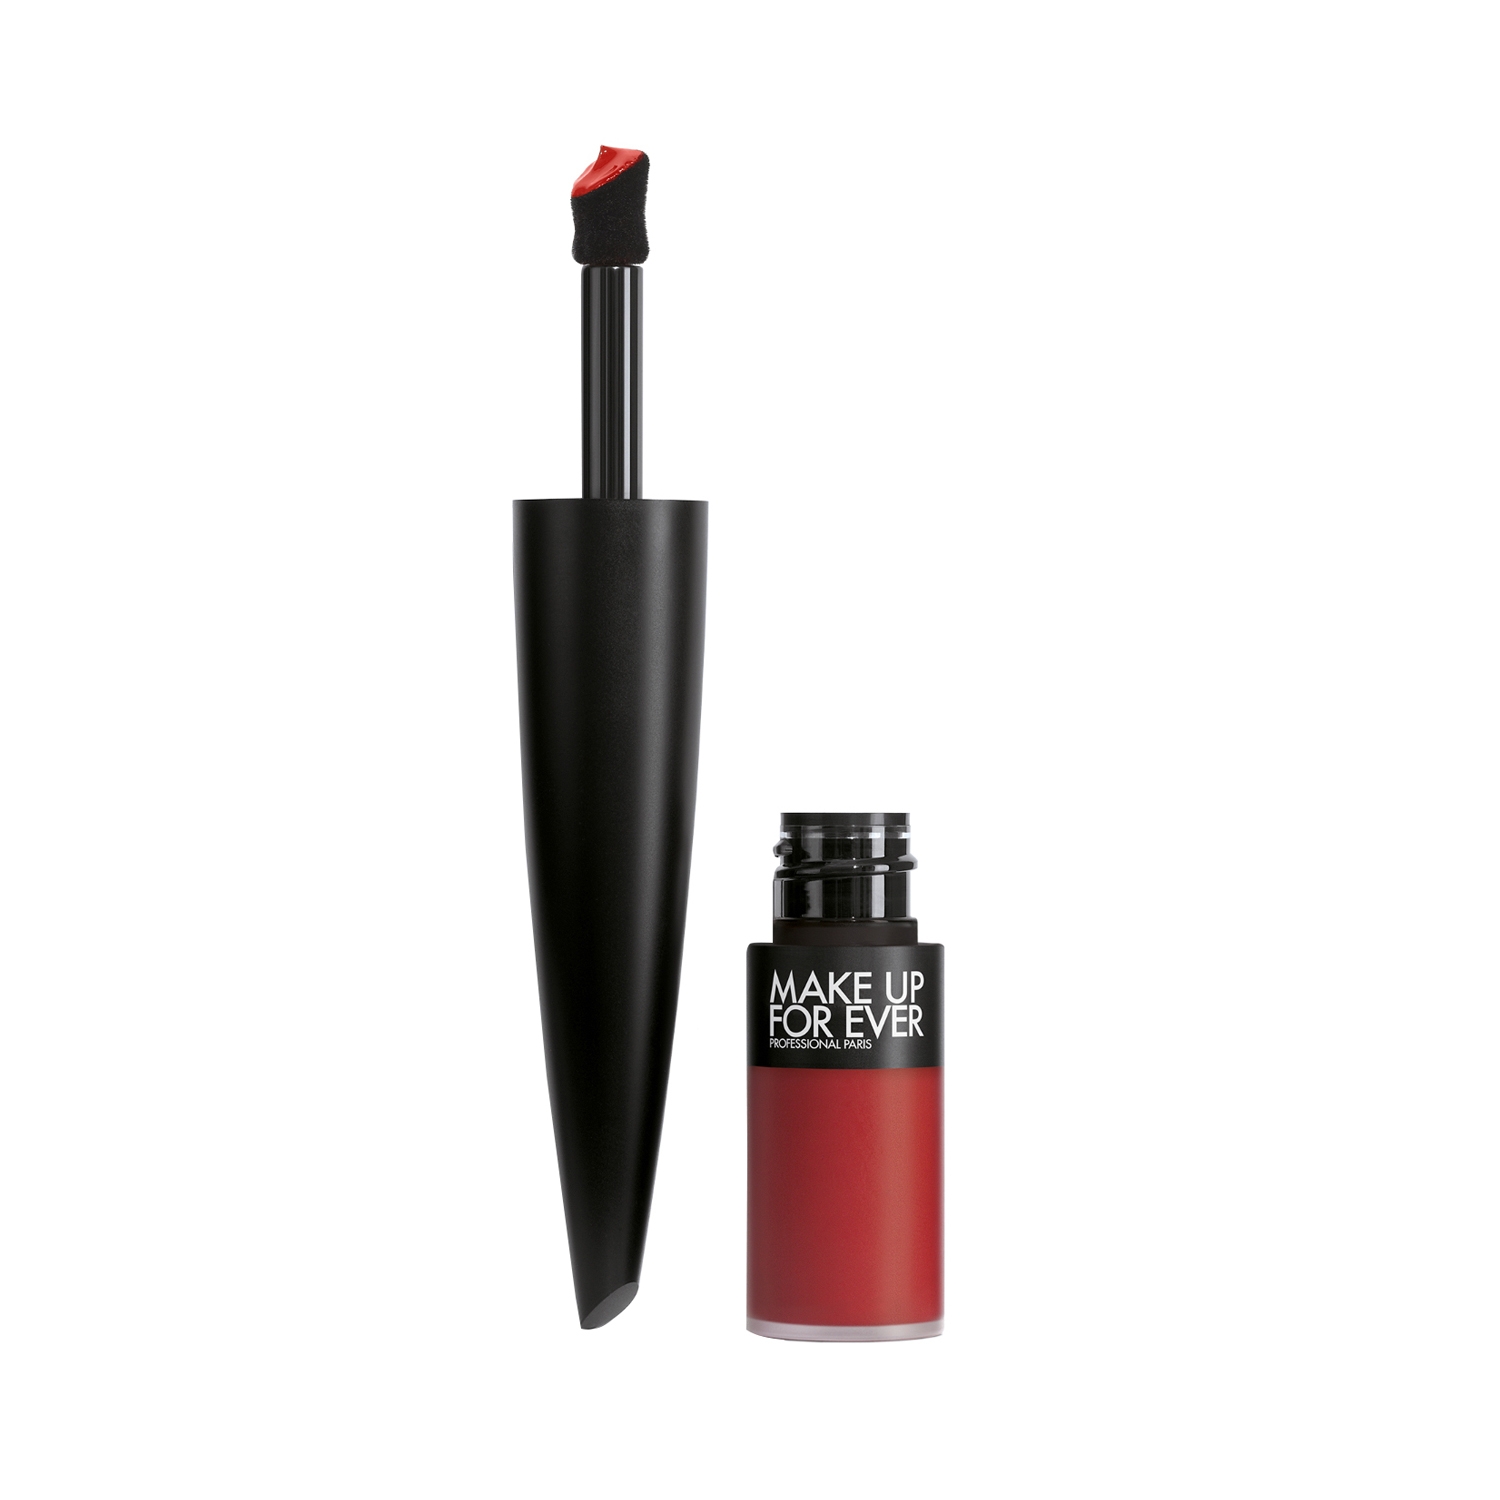 Make Up For Ever | Make Up For Ever Rouge Artist for Ever Matte Liquid Lipstick- Constantly on Fire 402 (4.5ml)